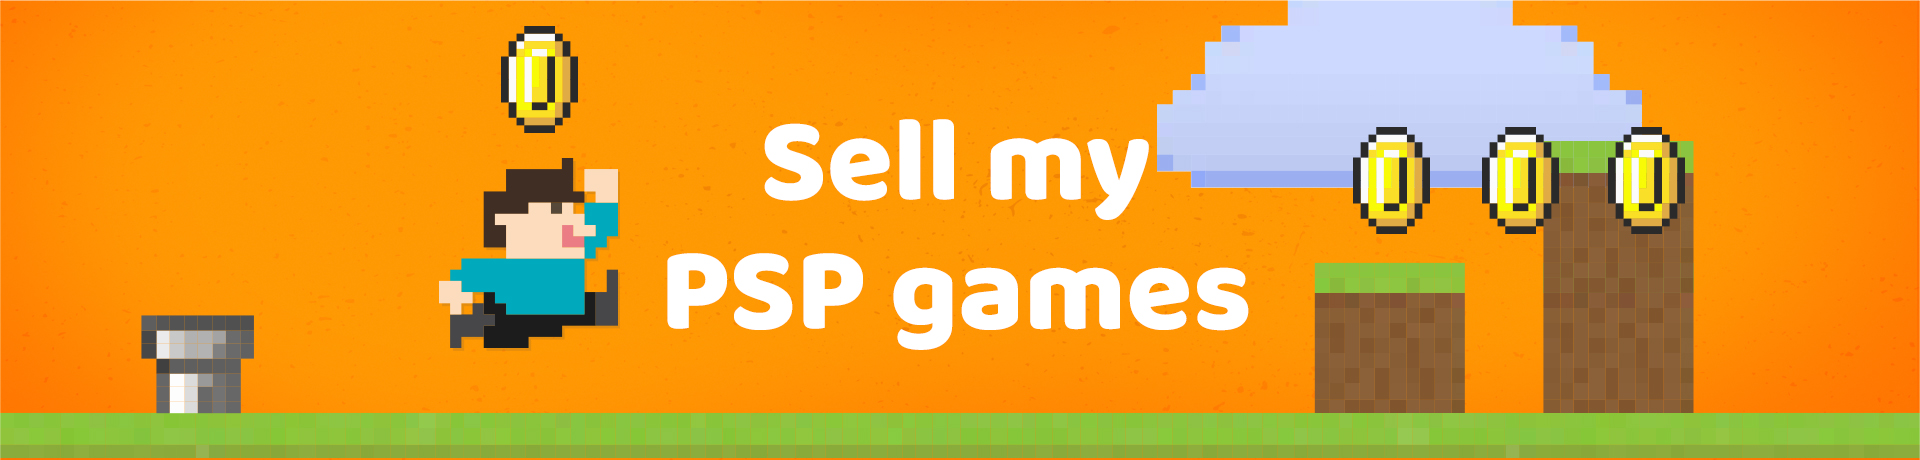 Sell PSP games